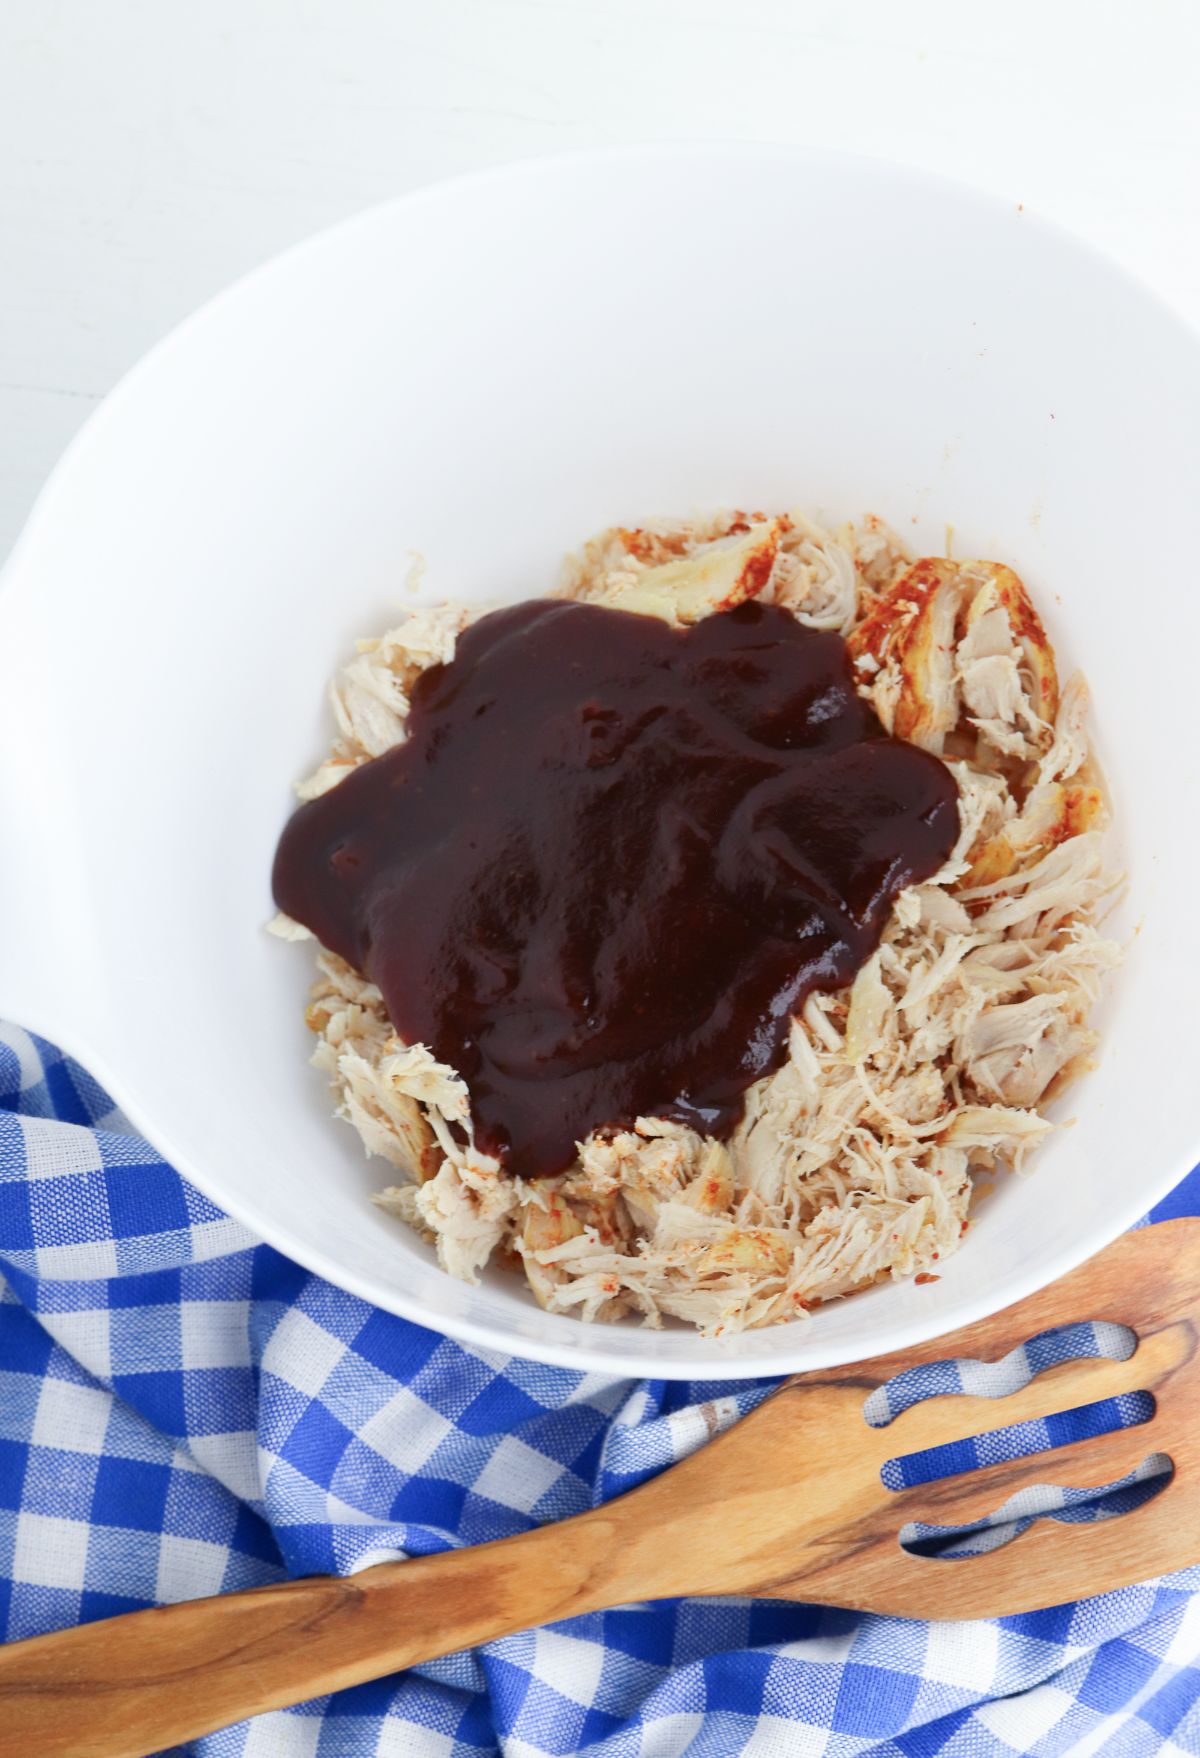 Shredded chicken topped with barbecue sauce in a white bowl, placed on a blue and white checkered cloth with a wooden fork to the side.